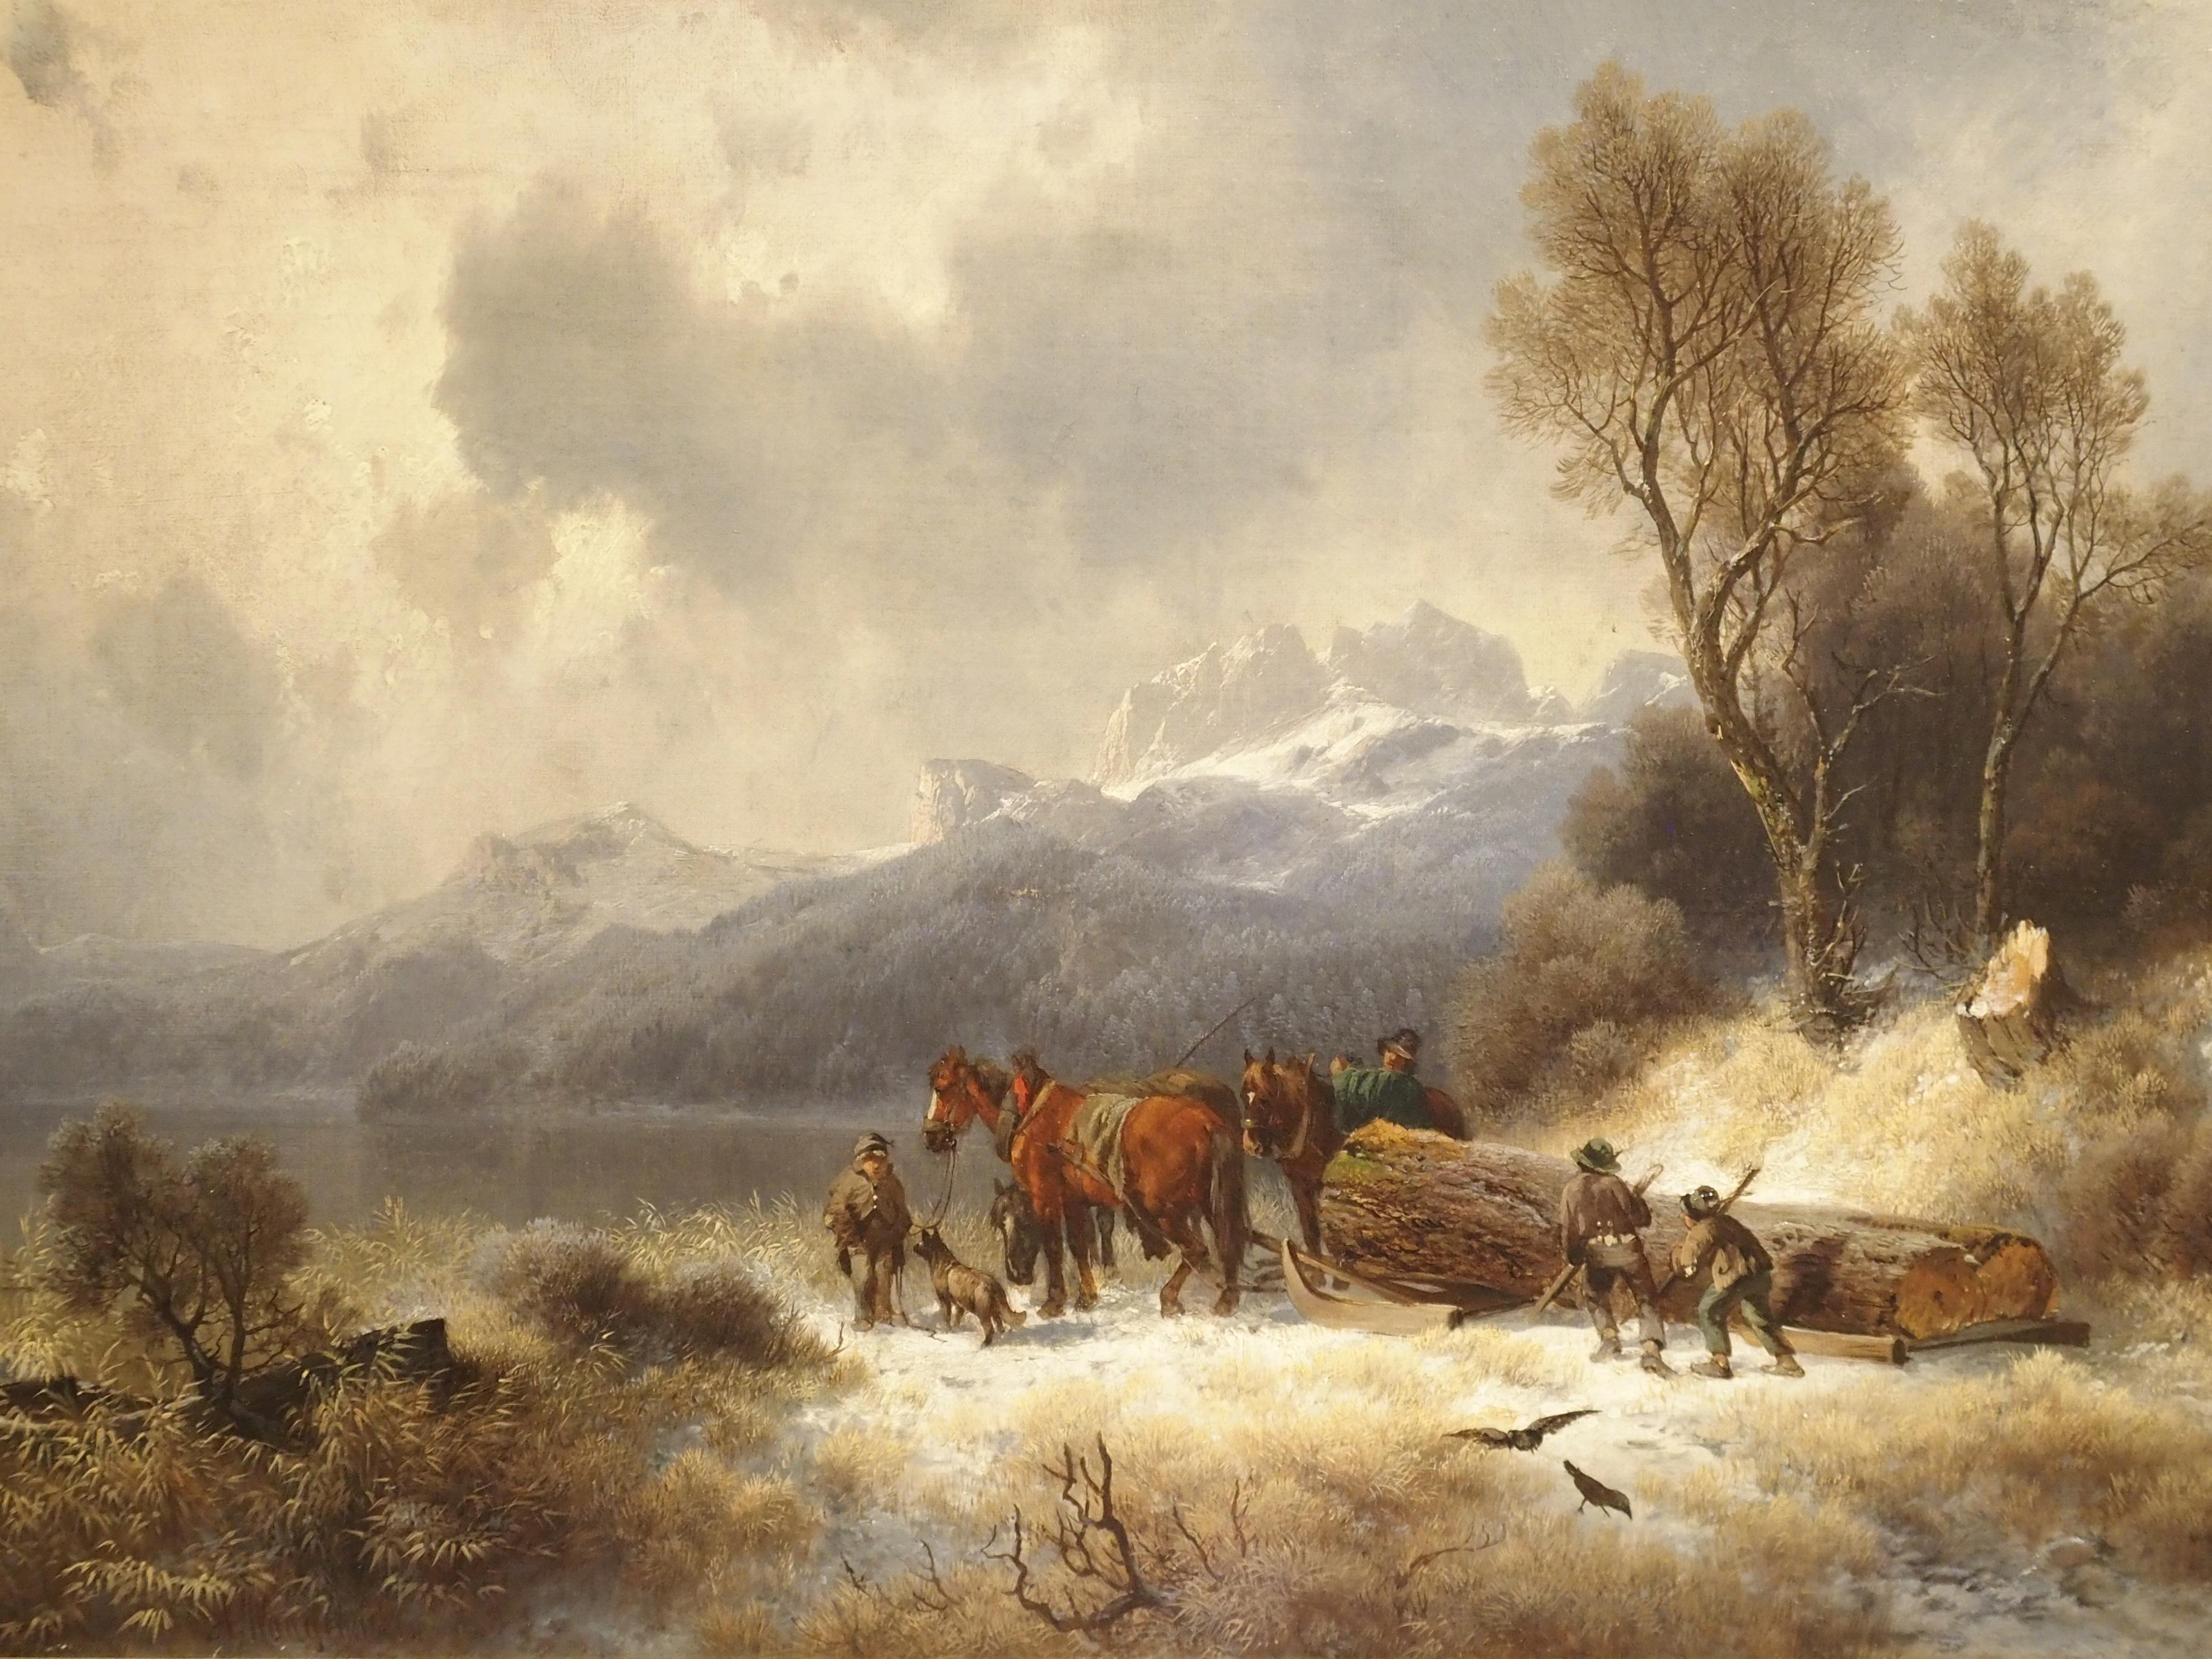 This oil painting of winter in the mountains with a lake in the foreground, depicts horses being readied for moving a massive log cut. The stump where the logs were cut is on the hill to the right. A dog looks out onto the lake, while two crows in